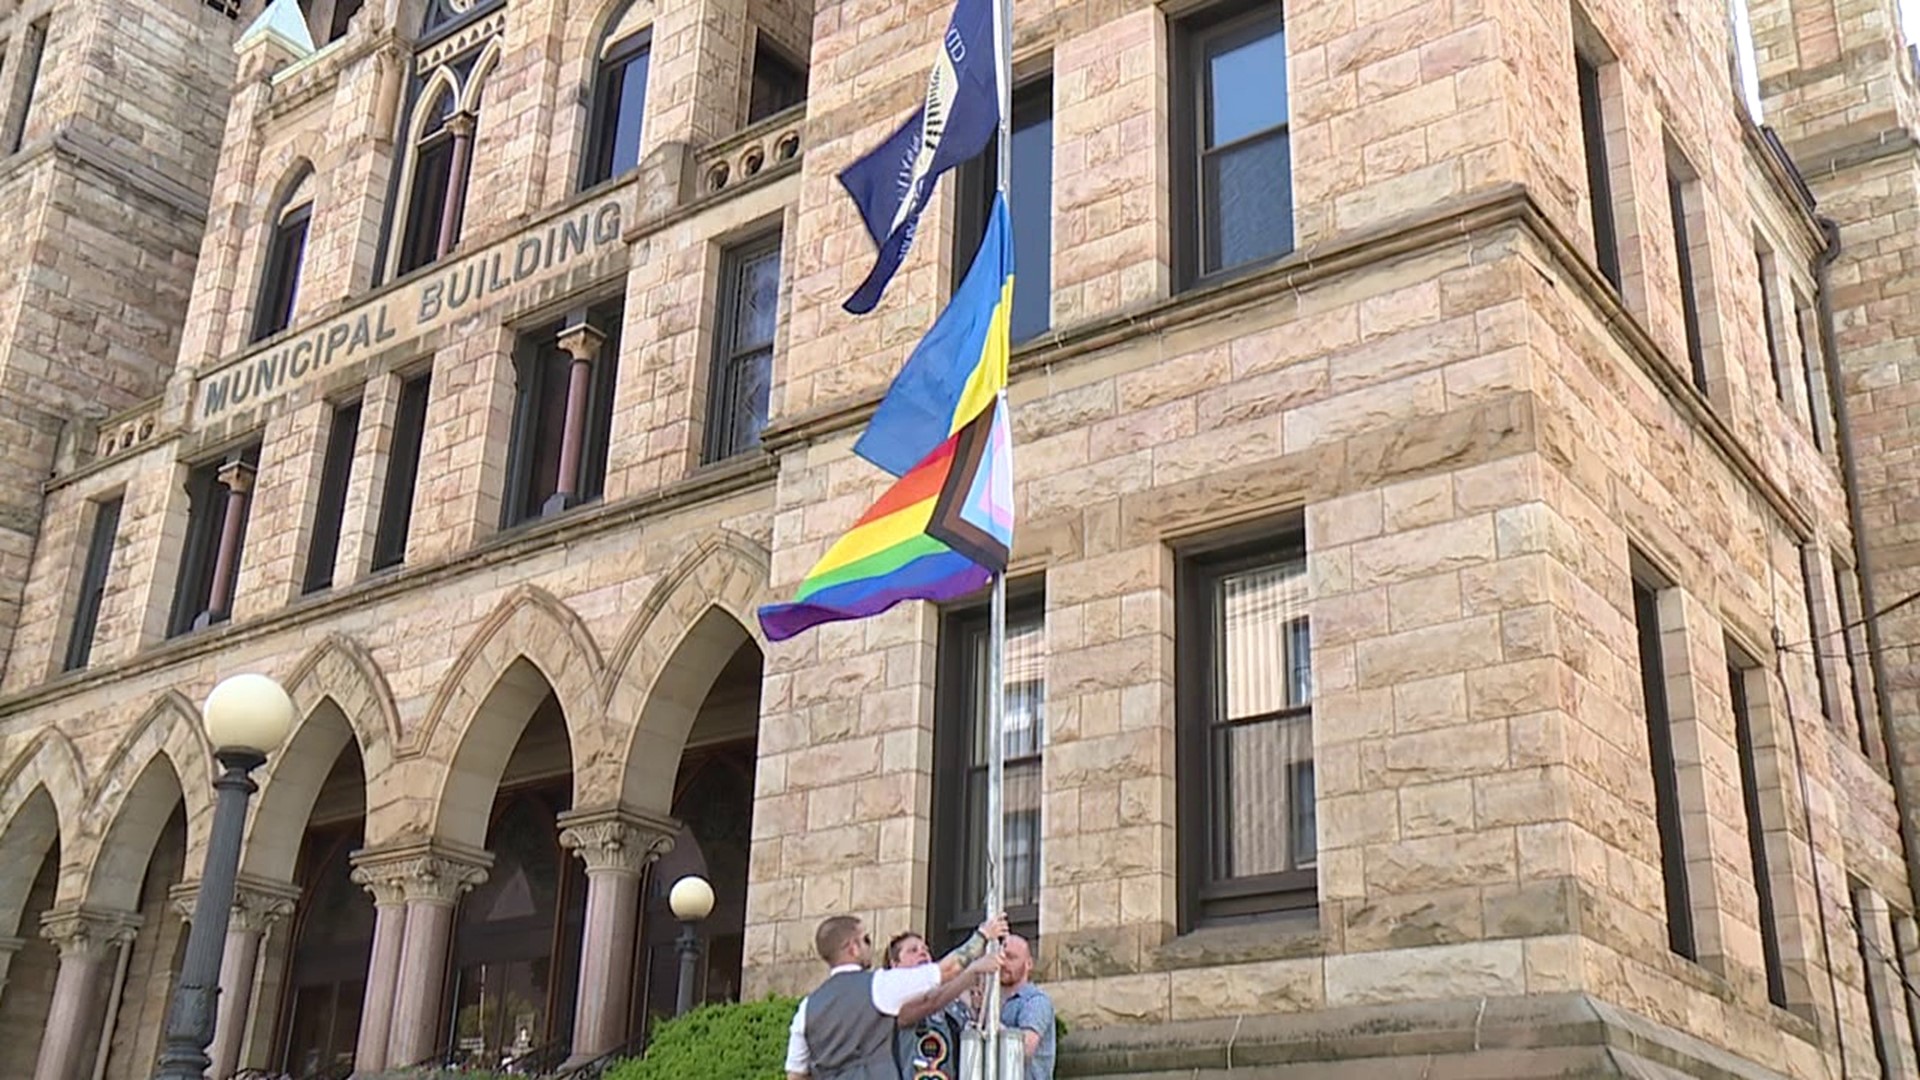 The Electric City began Pride Month with a flag-raising in downtown Scranton on Saturday.